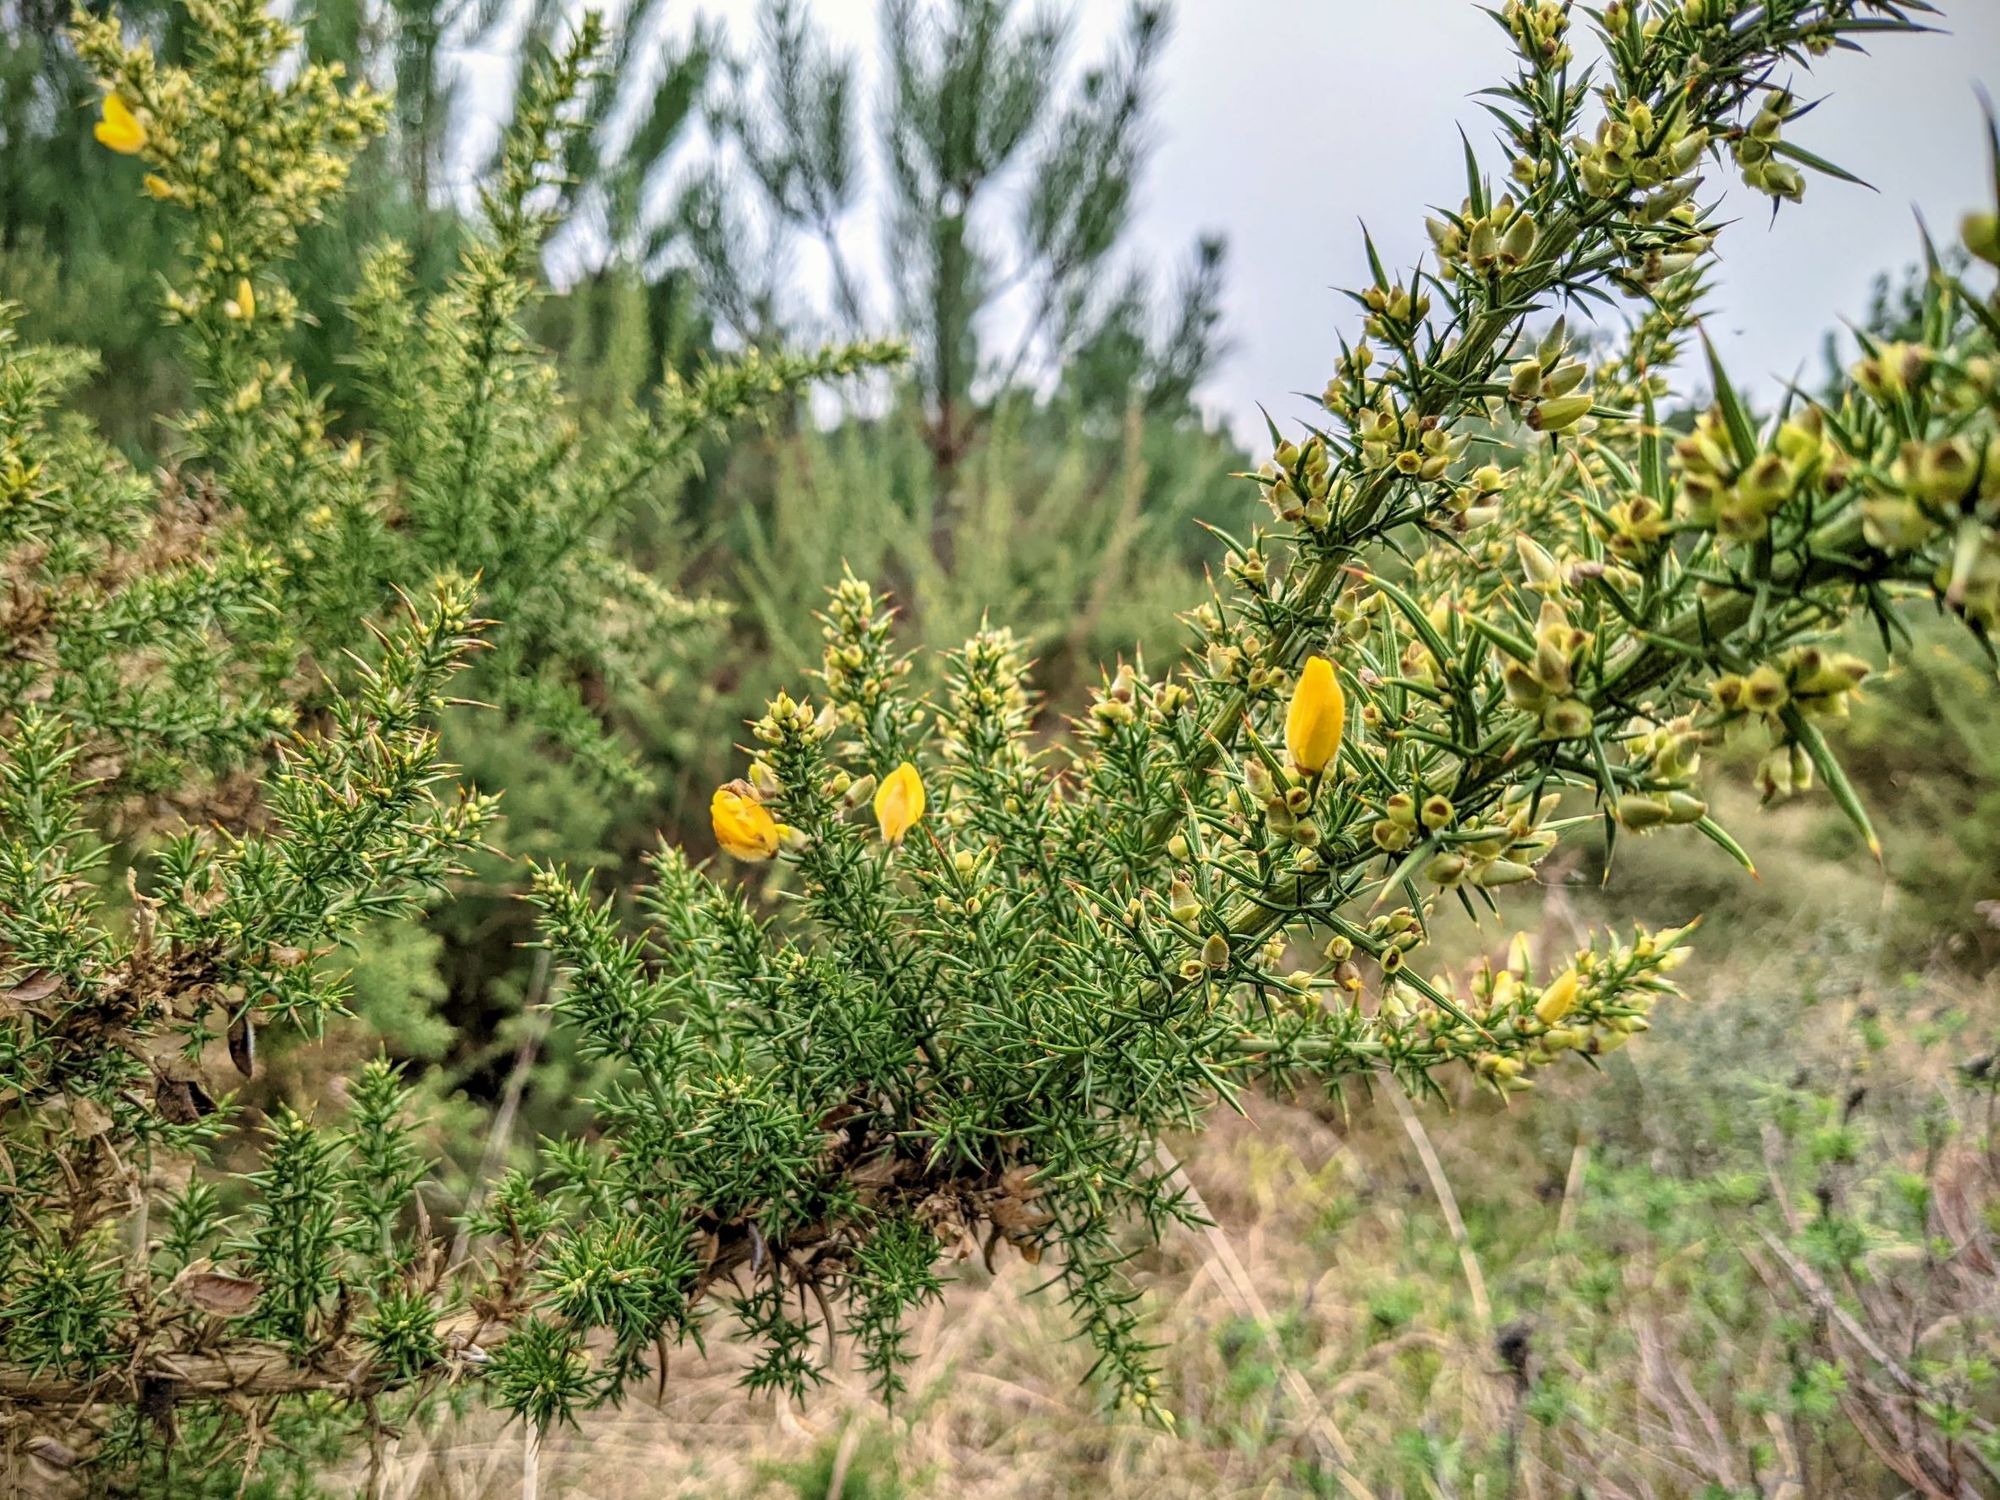 Close up of the plant Gorse (Ulex europaeus), blossoming a few yellow flowers.